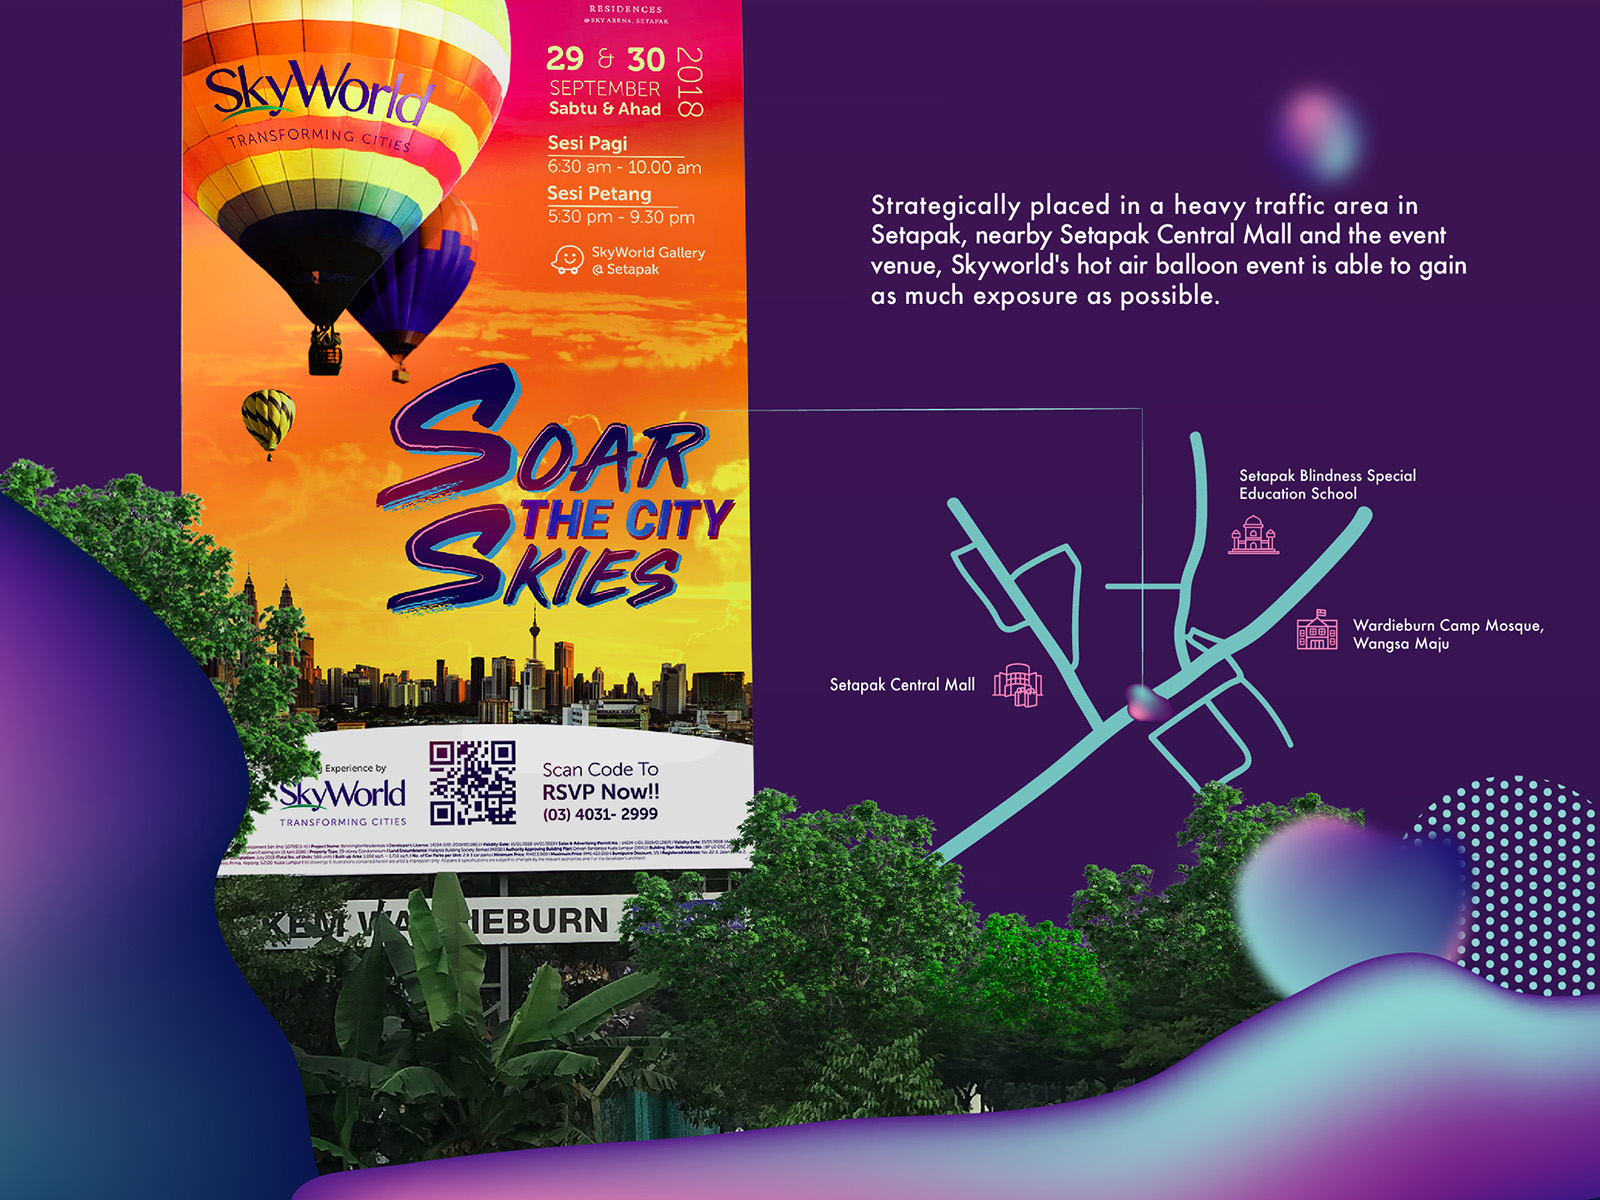 Skyworld Soar The City Skies campaign key visual developed and applied to billboard which is strategically located for maximum exposure